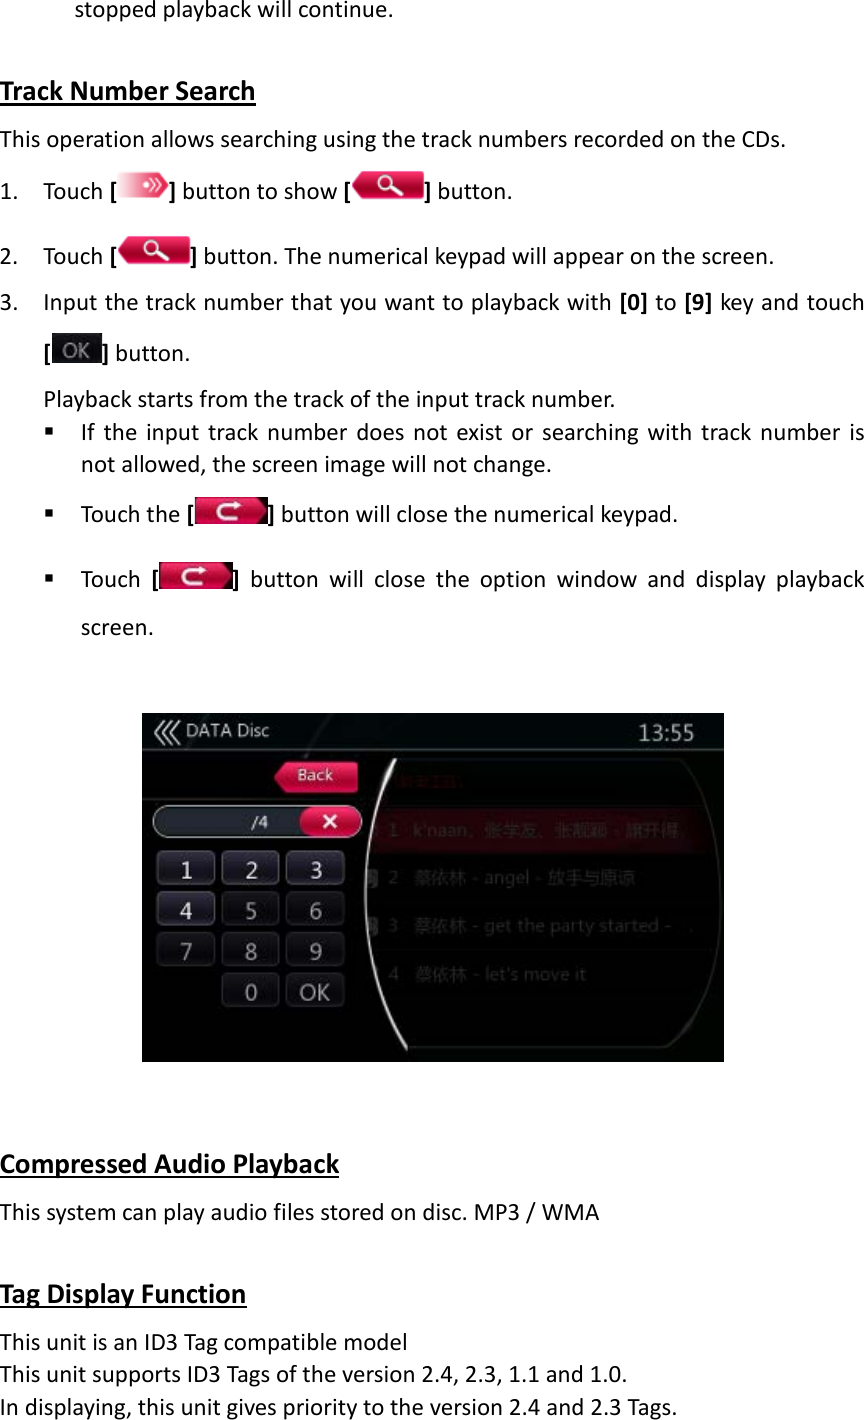 stopped playback will continue.  Track Number Search This operation allows searching using the track numbers recorded on the CDs. 1. Touch [ ] button to show [ ] button. 2. Touch [ ] button. The numerical keypad will appear on the screen. 3. Input the track number that you want to playback with [0] to [9] key and touch [ ] button. Playback starts from the track of the input track number.    If the input track number does not exist or searching with track number is not allowed, the screen image will not change.    Touch the [] button will close the numerical keypad.  Touch  []  button will close the option window and display playback screen.      Compressed Audio Playback This system can play audio files stored on disc. MP3 / WMA  Tag Display Function This unit is an ID3 Tag compatible model This unit supports ID3 Tags of the version 2.4, 2.3, 1.1 and 1.0. In displaying, this unit gives priority to the version 2.4 and 2.3 Tags. 